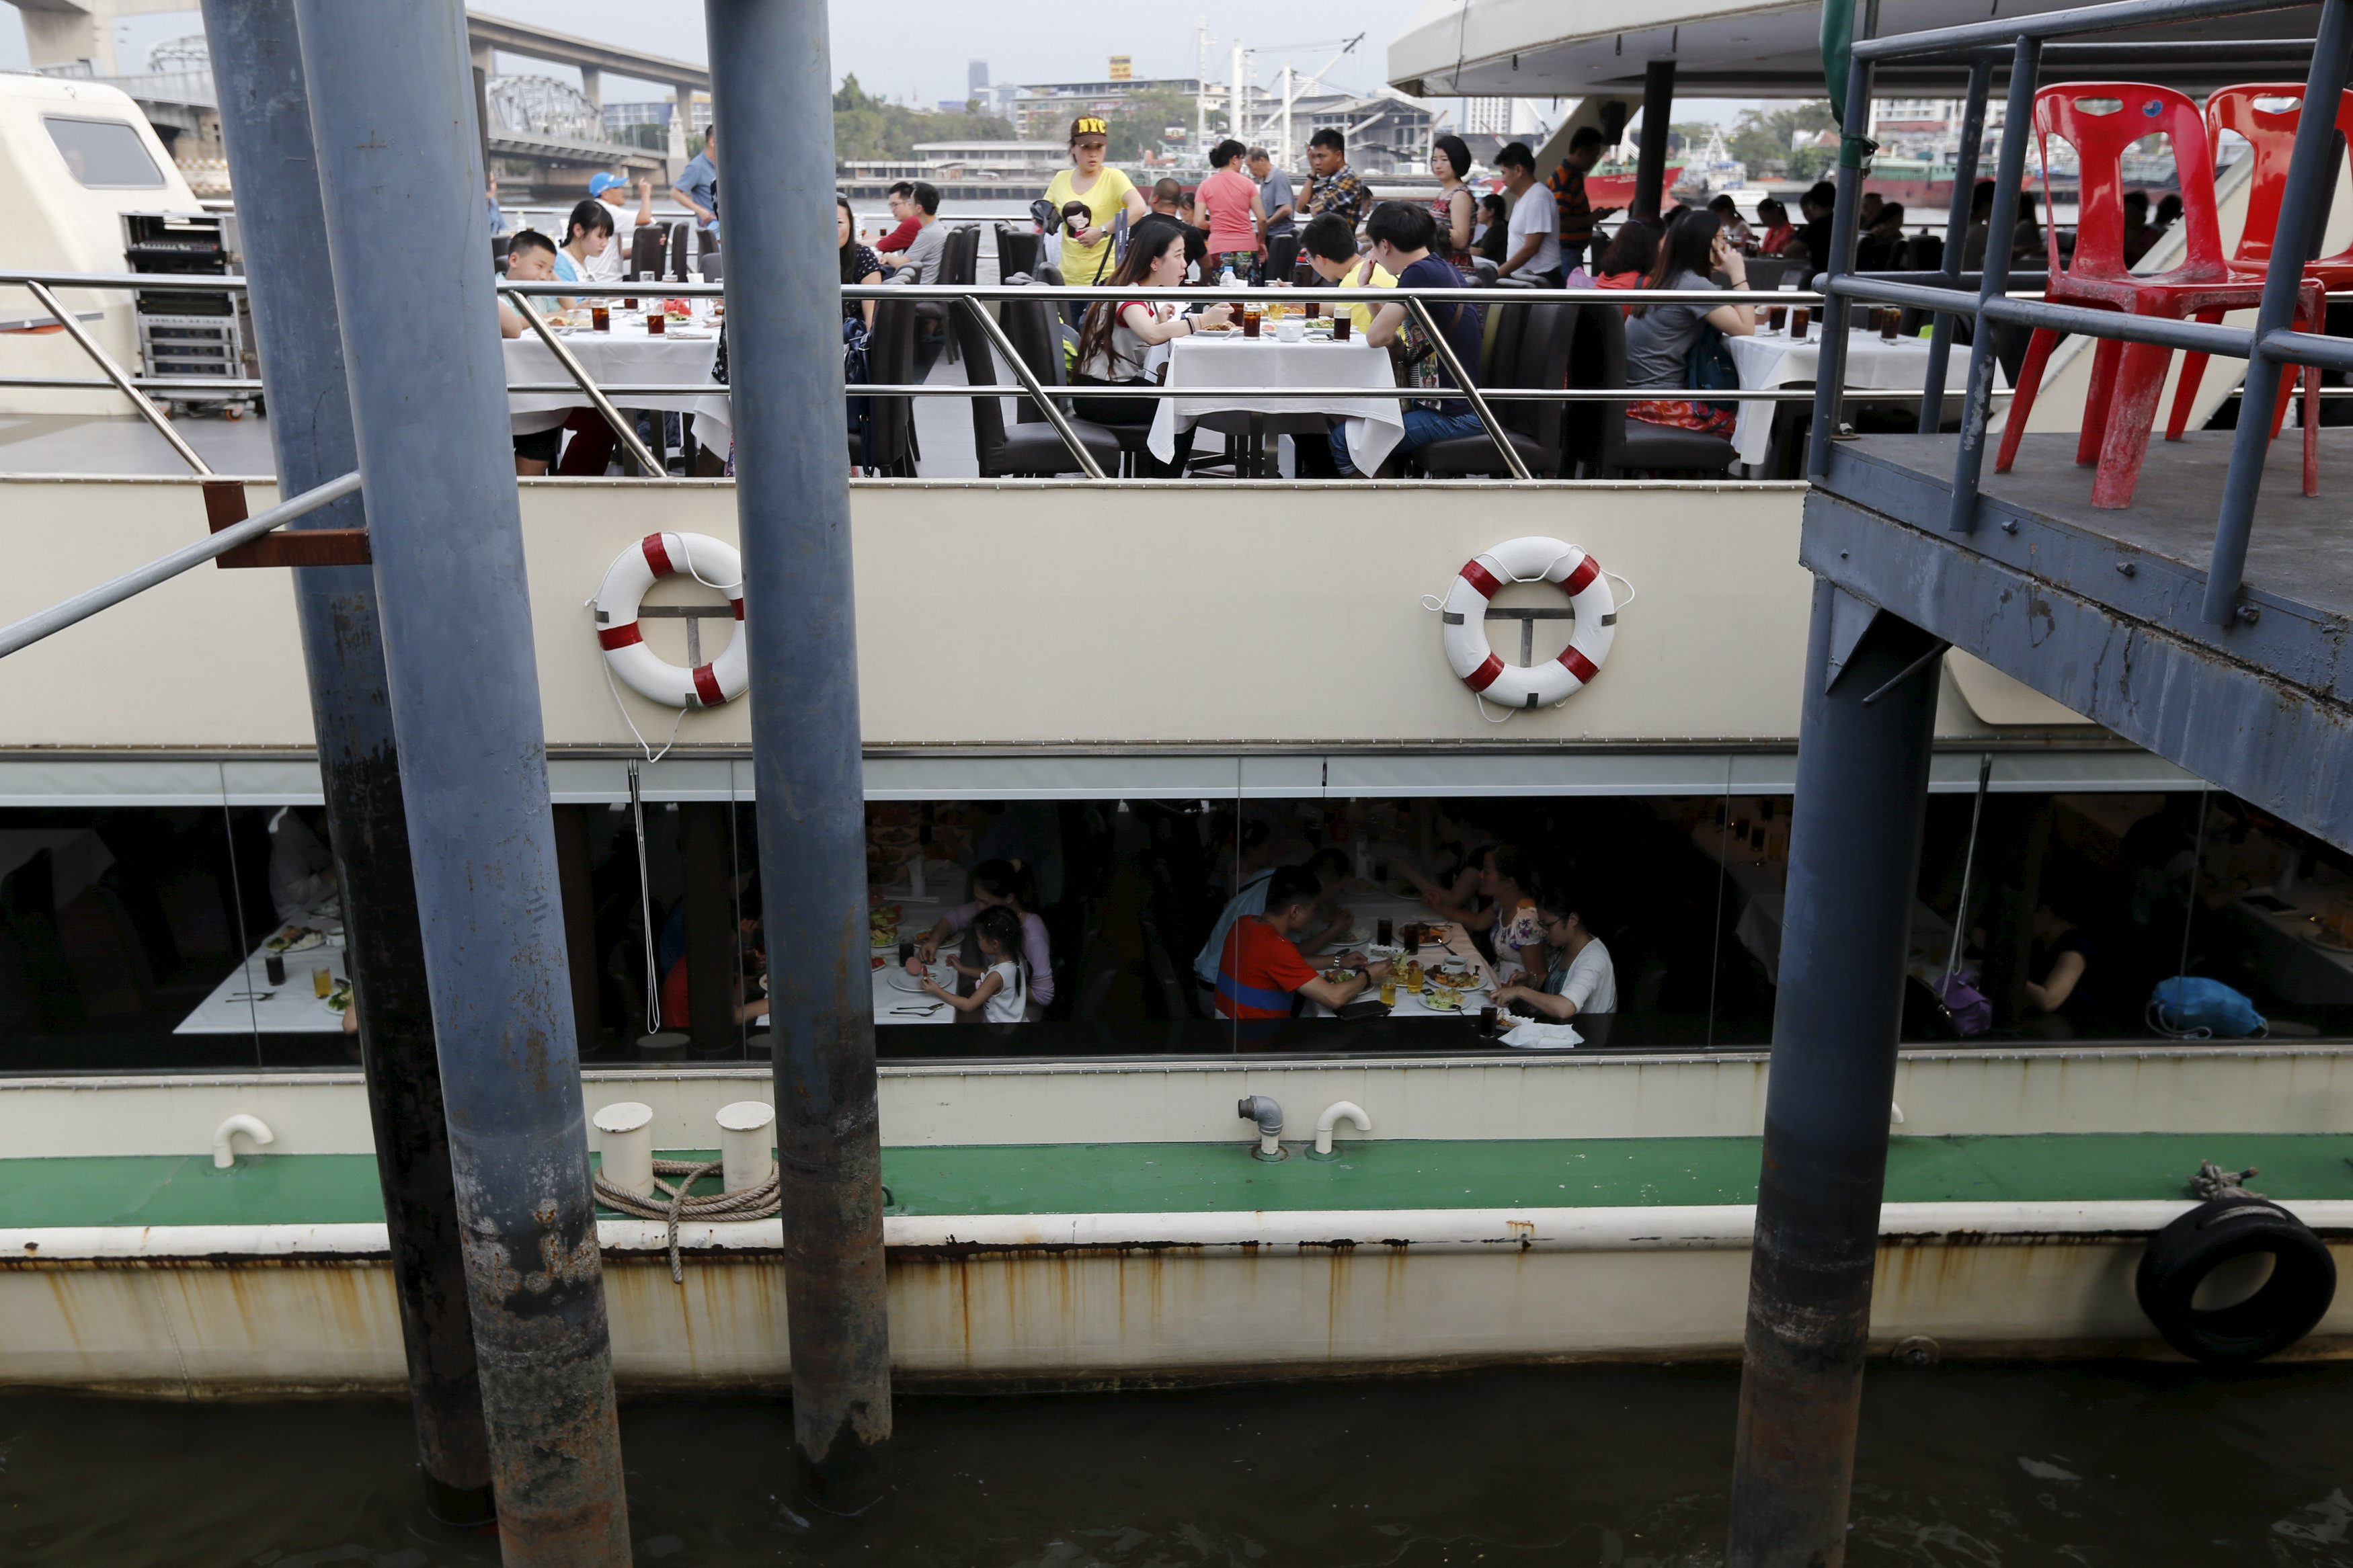 Chinese tourists dine onboard a boat at a pier at Chao Phraya River in Bangkok February 16, 2016. The perpetrators of last year's deadly explosion at a Bangkok shrine originally chose a pier packed with Chinese tourists as their primary target and had amassed enough chemicals to make 10 equally powerful bombs, the chief of Thailand's police bomb squad told Reuters. Picture taken February 16, 2016. REUTERS/Jorge Silva